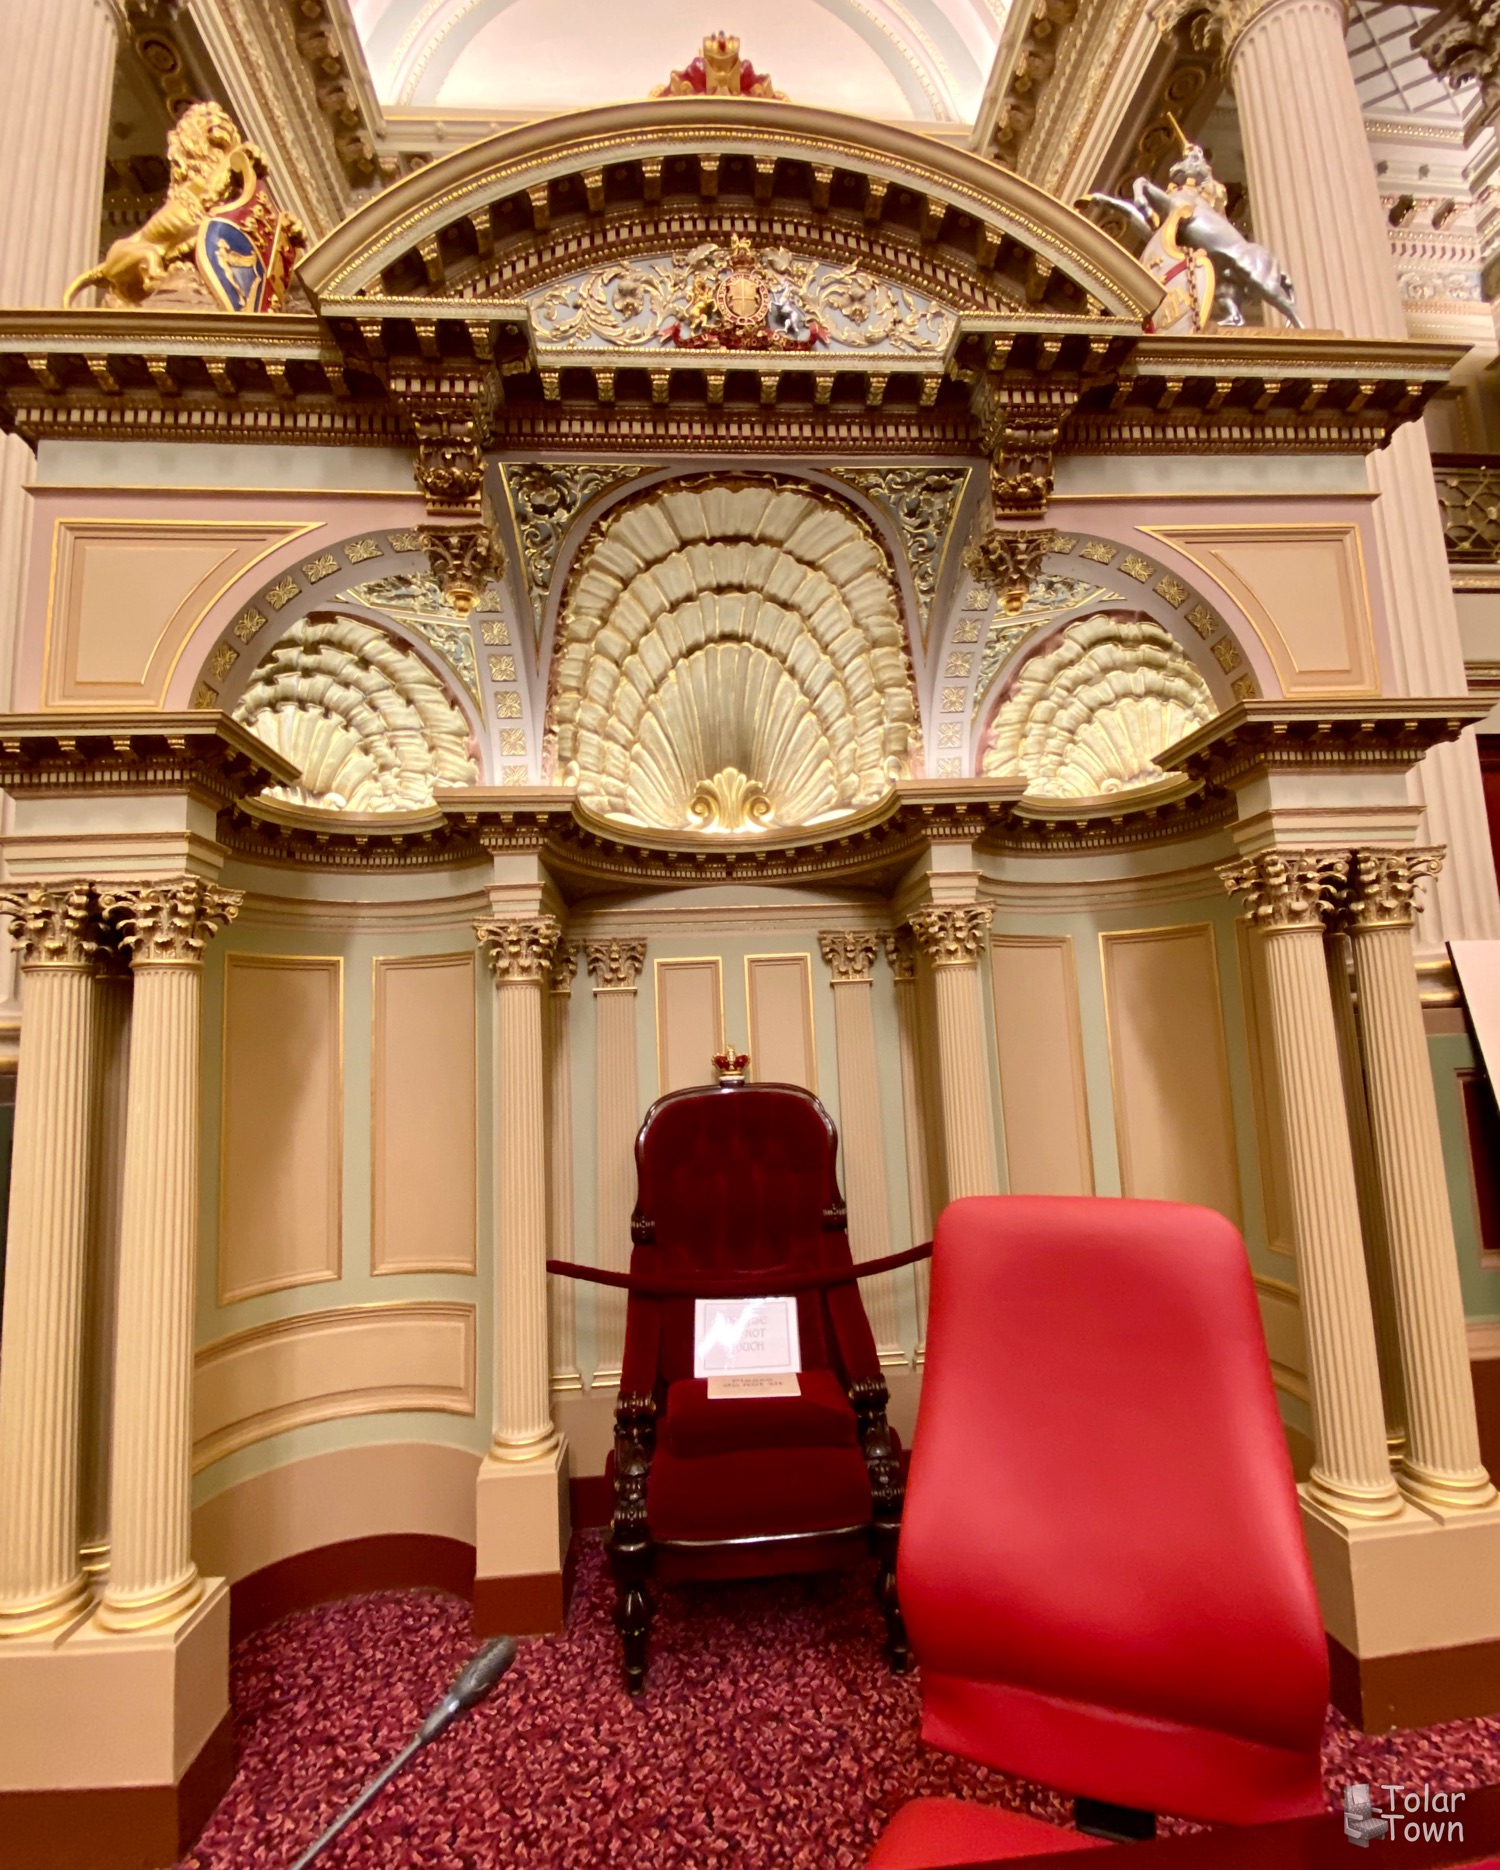 Parliament: the Queen’s seat